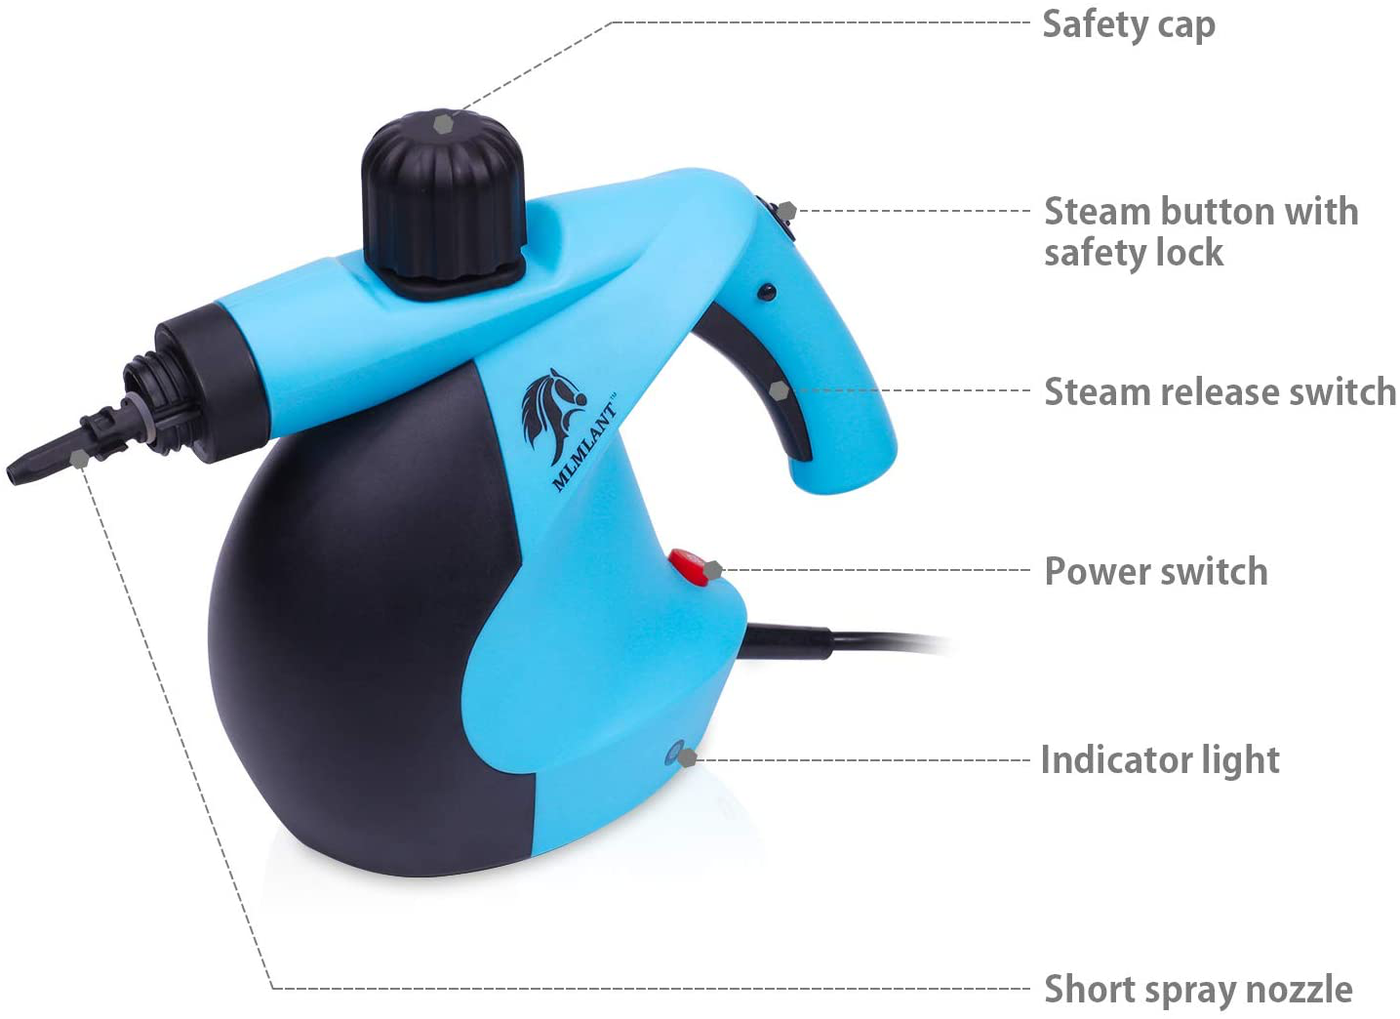 MLMLANT Steam Cleaner- Multi Purpose High Pressure Steamer with 11-Piece Accessories, Chemical-Free Steam Cleaning for Home, Stain Removal, Curtains, Car Seats, Floor